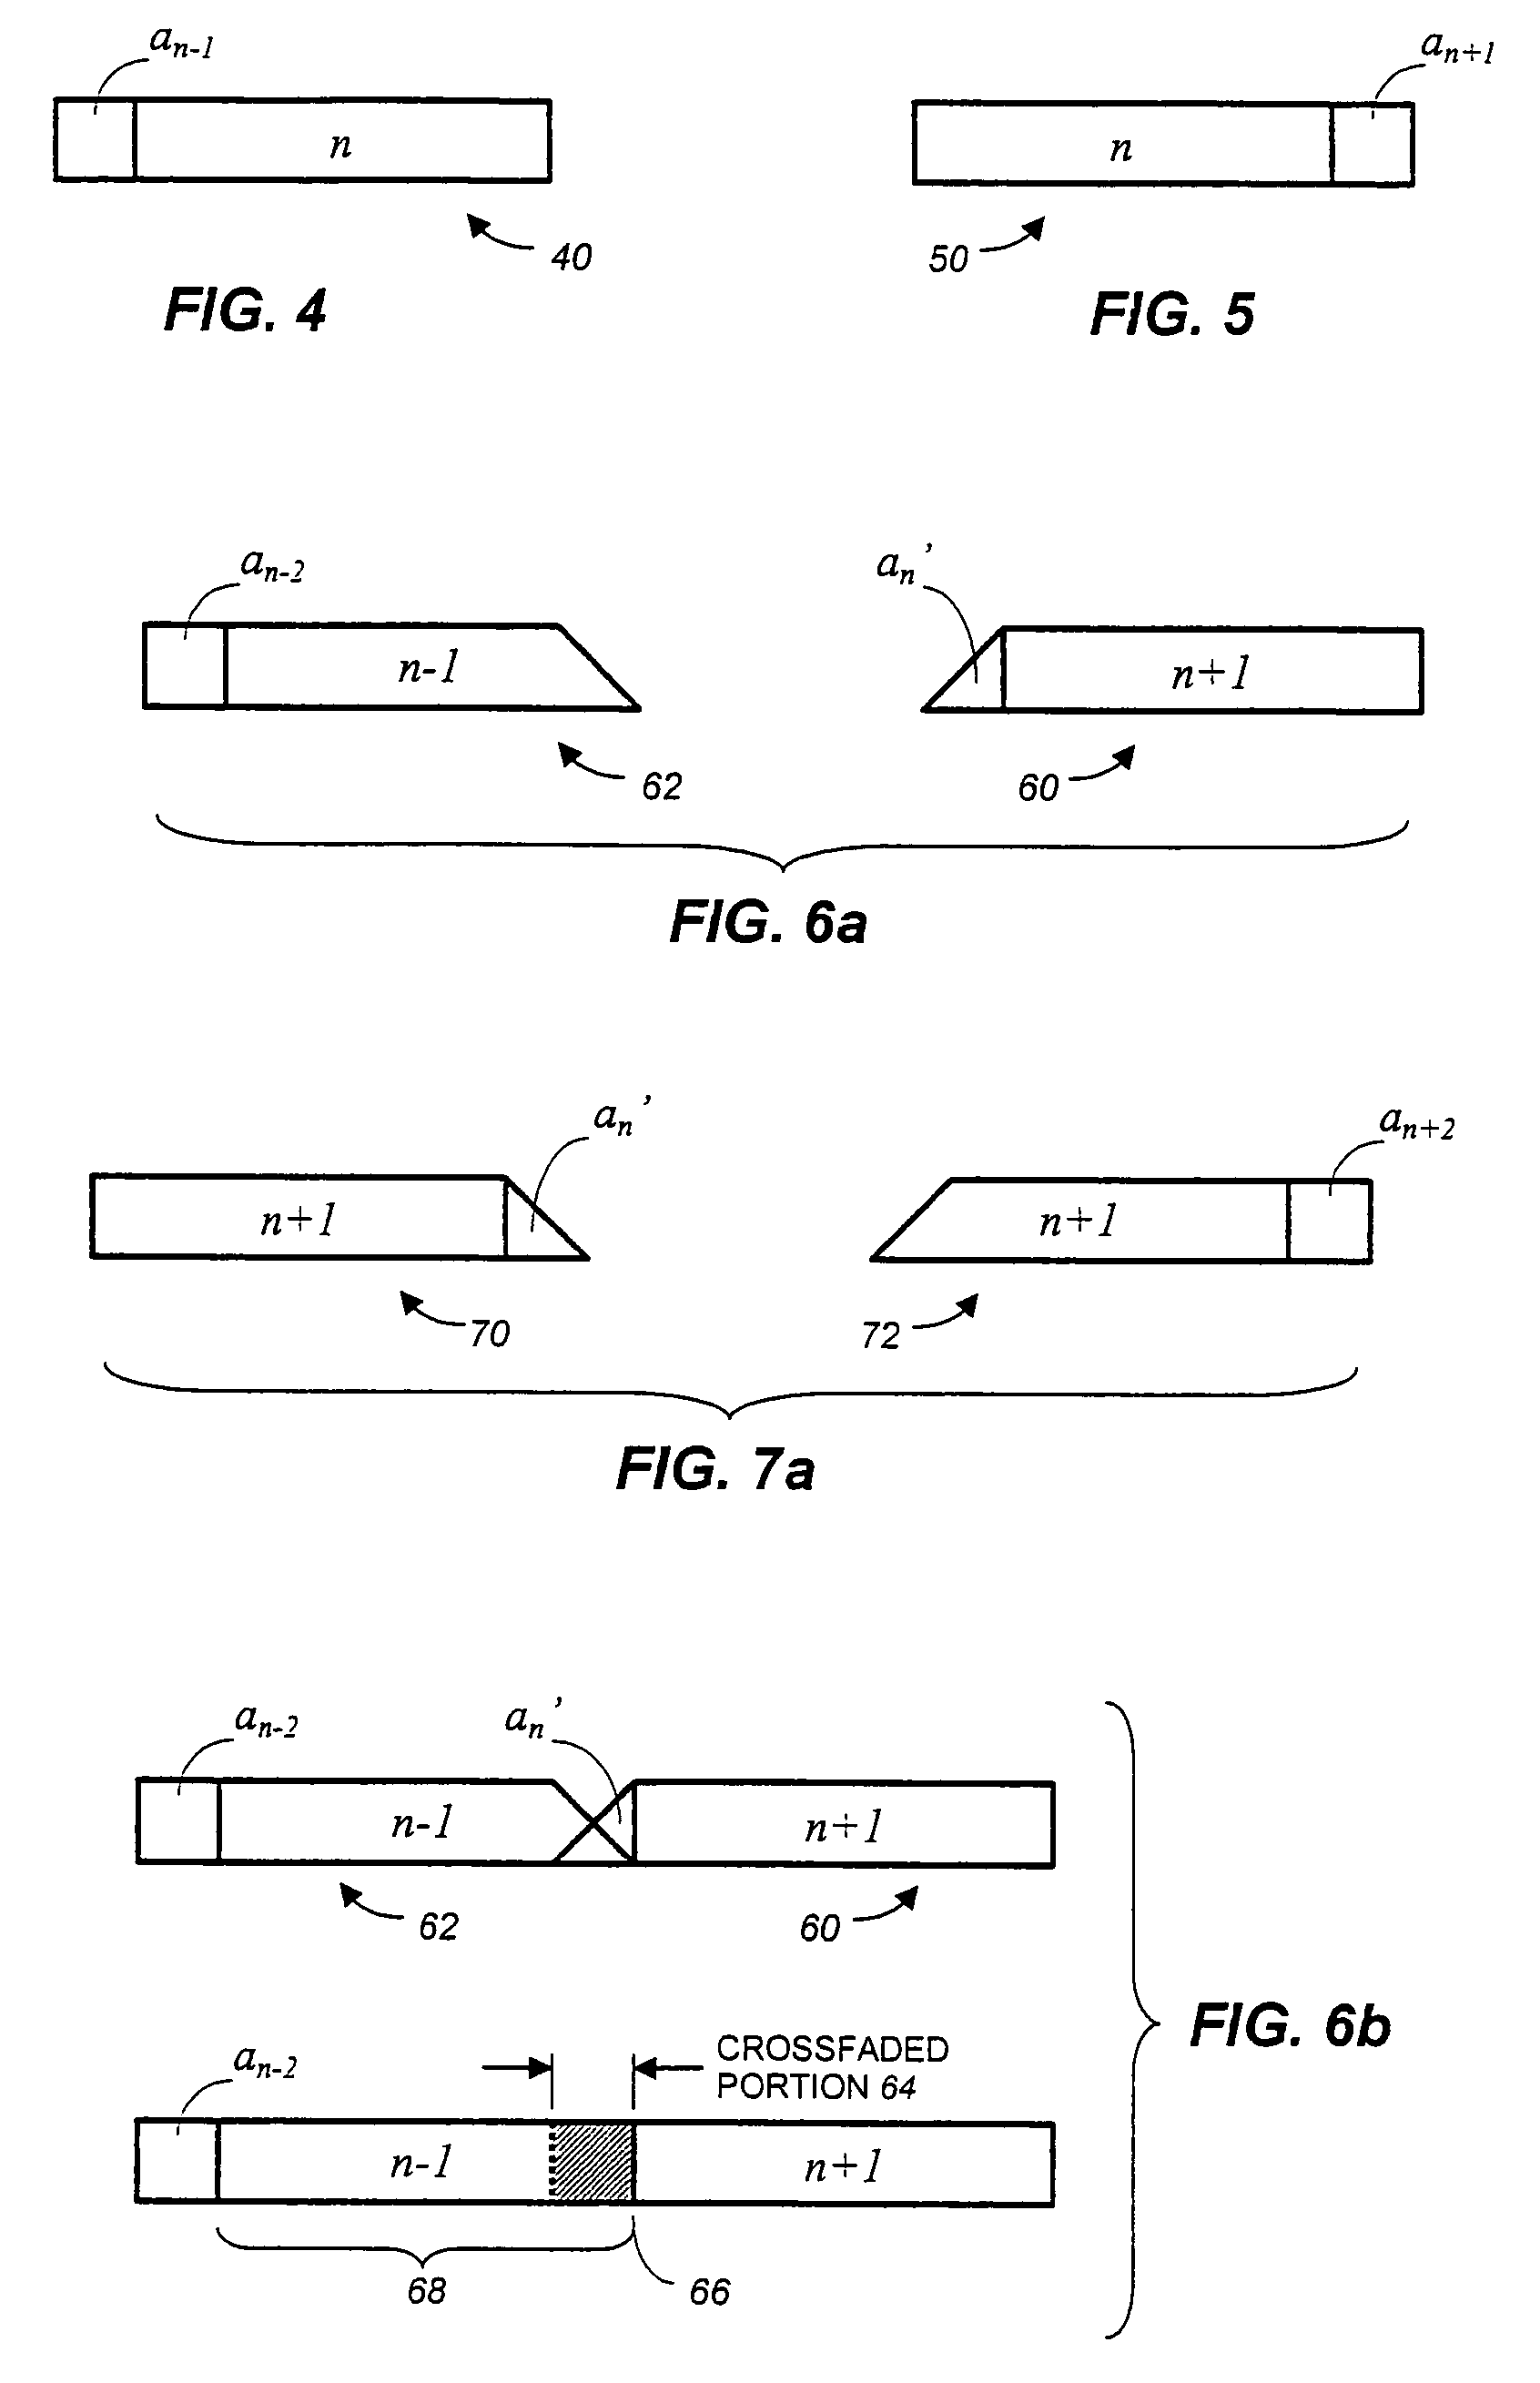 Frame-based audio transmission/storage with overlap to facilitate smooth crossfading